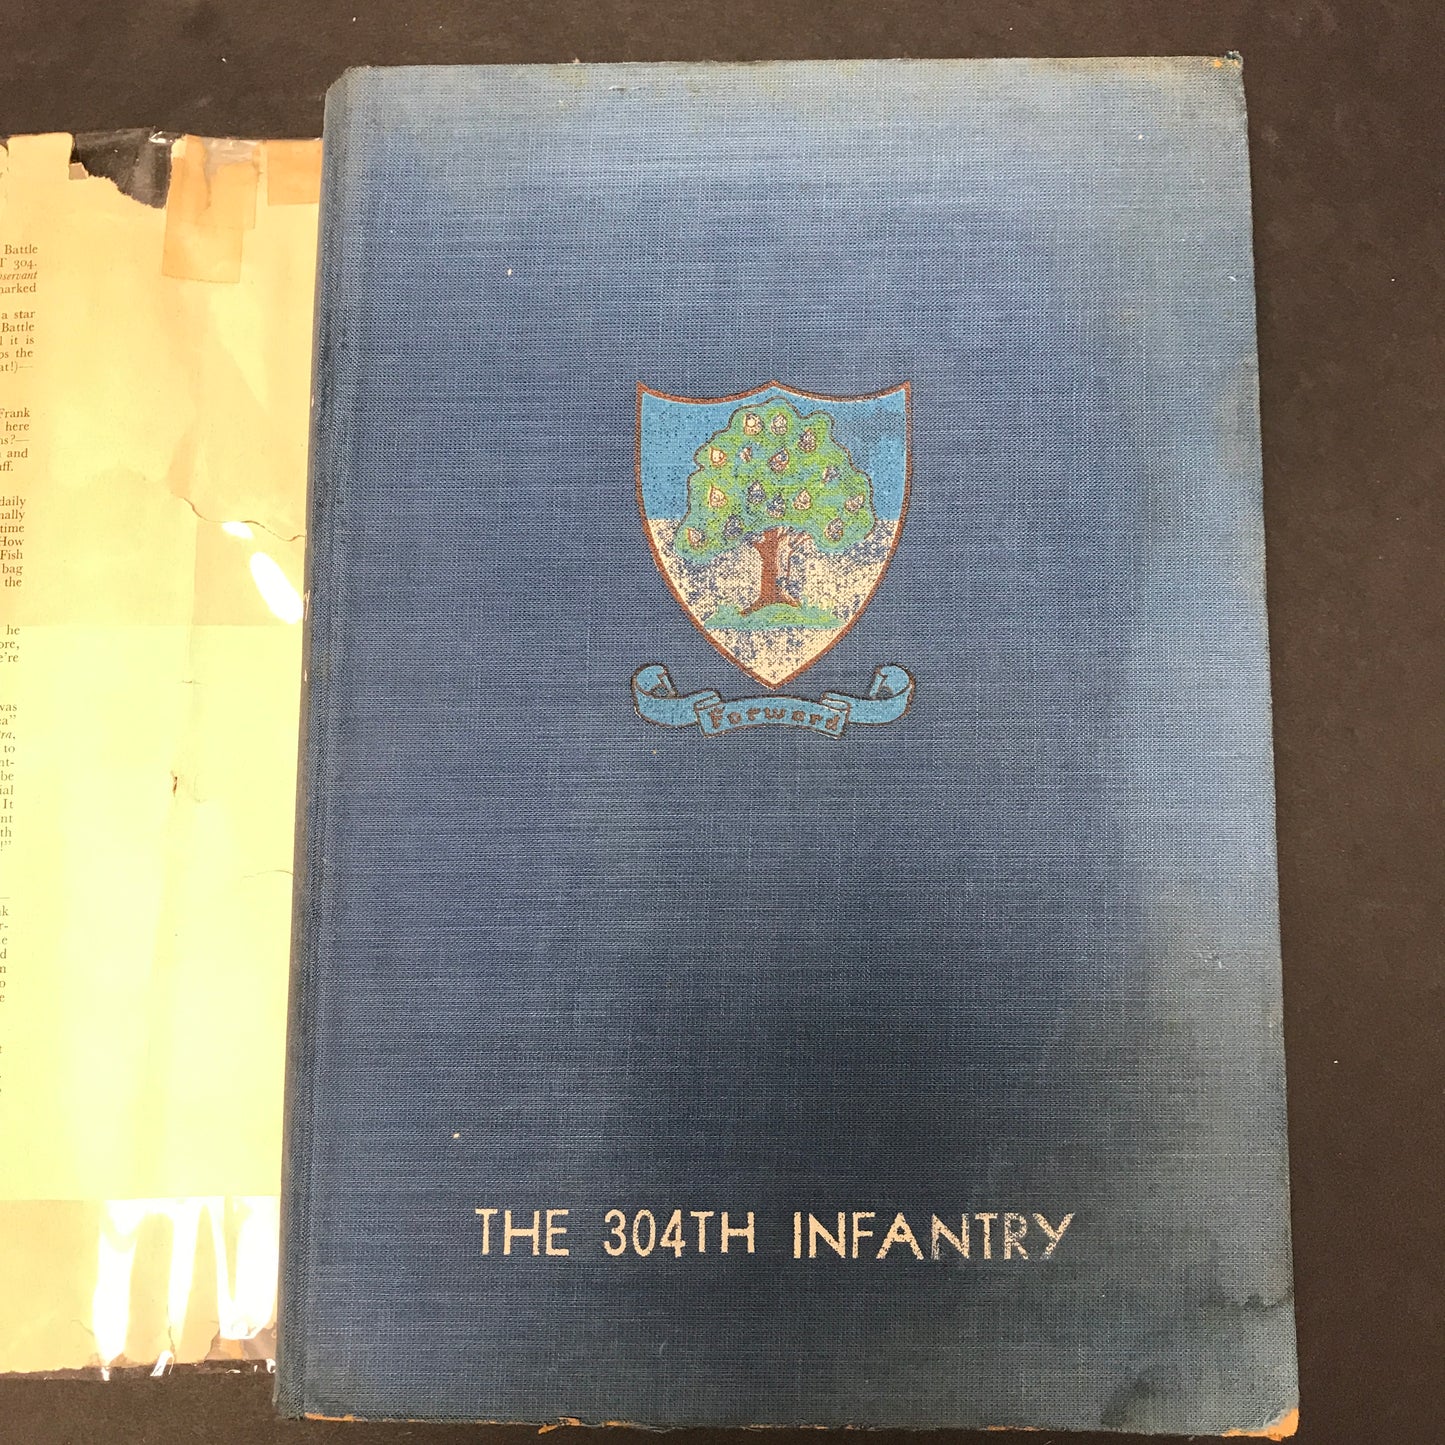 History of the 304th Infantry Regiment - Includes Memorabilia - 1945